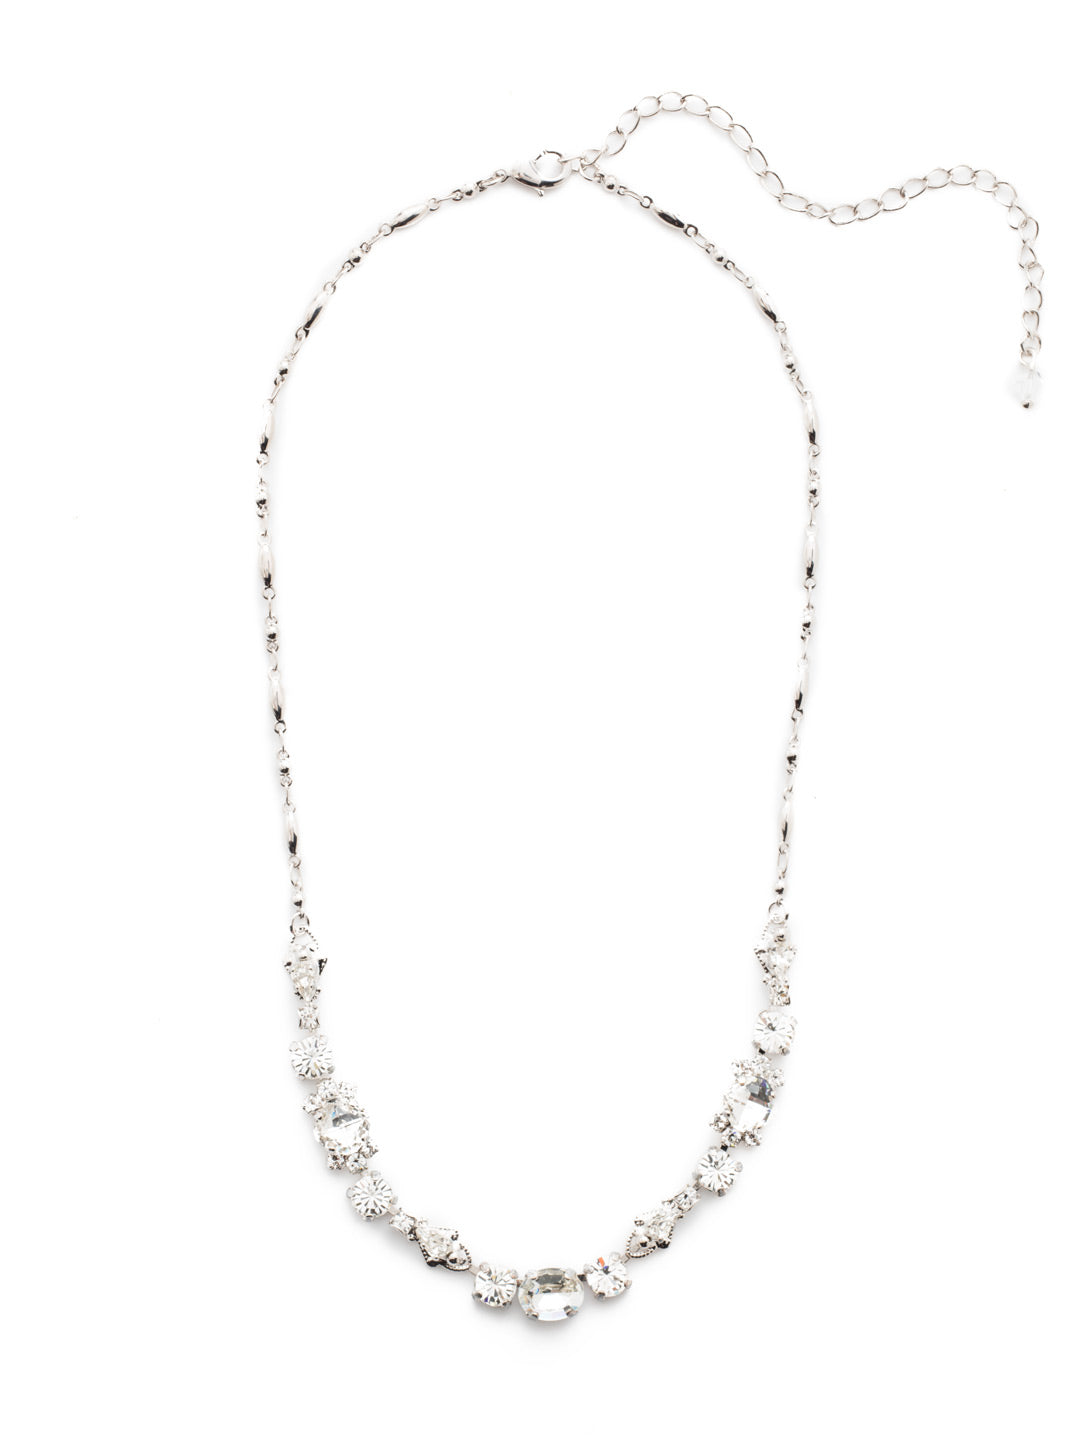 Saffron Tennis Necklace - NDS48RHCRY - <p>This demure half line necklace boasts round, oval, teardrop and cushion cut crystals accented by a decorative chain. From Sorrelli's Crystal collection in our Palladium Silver-tone finish.</p>